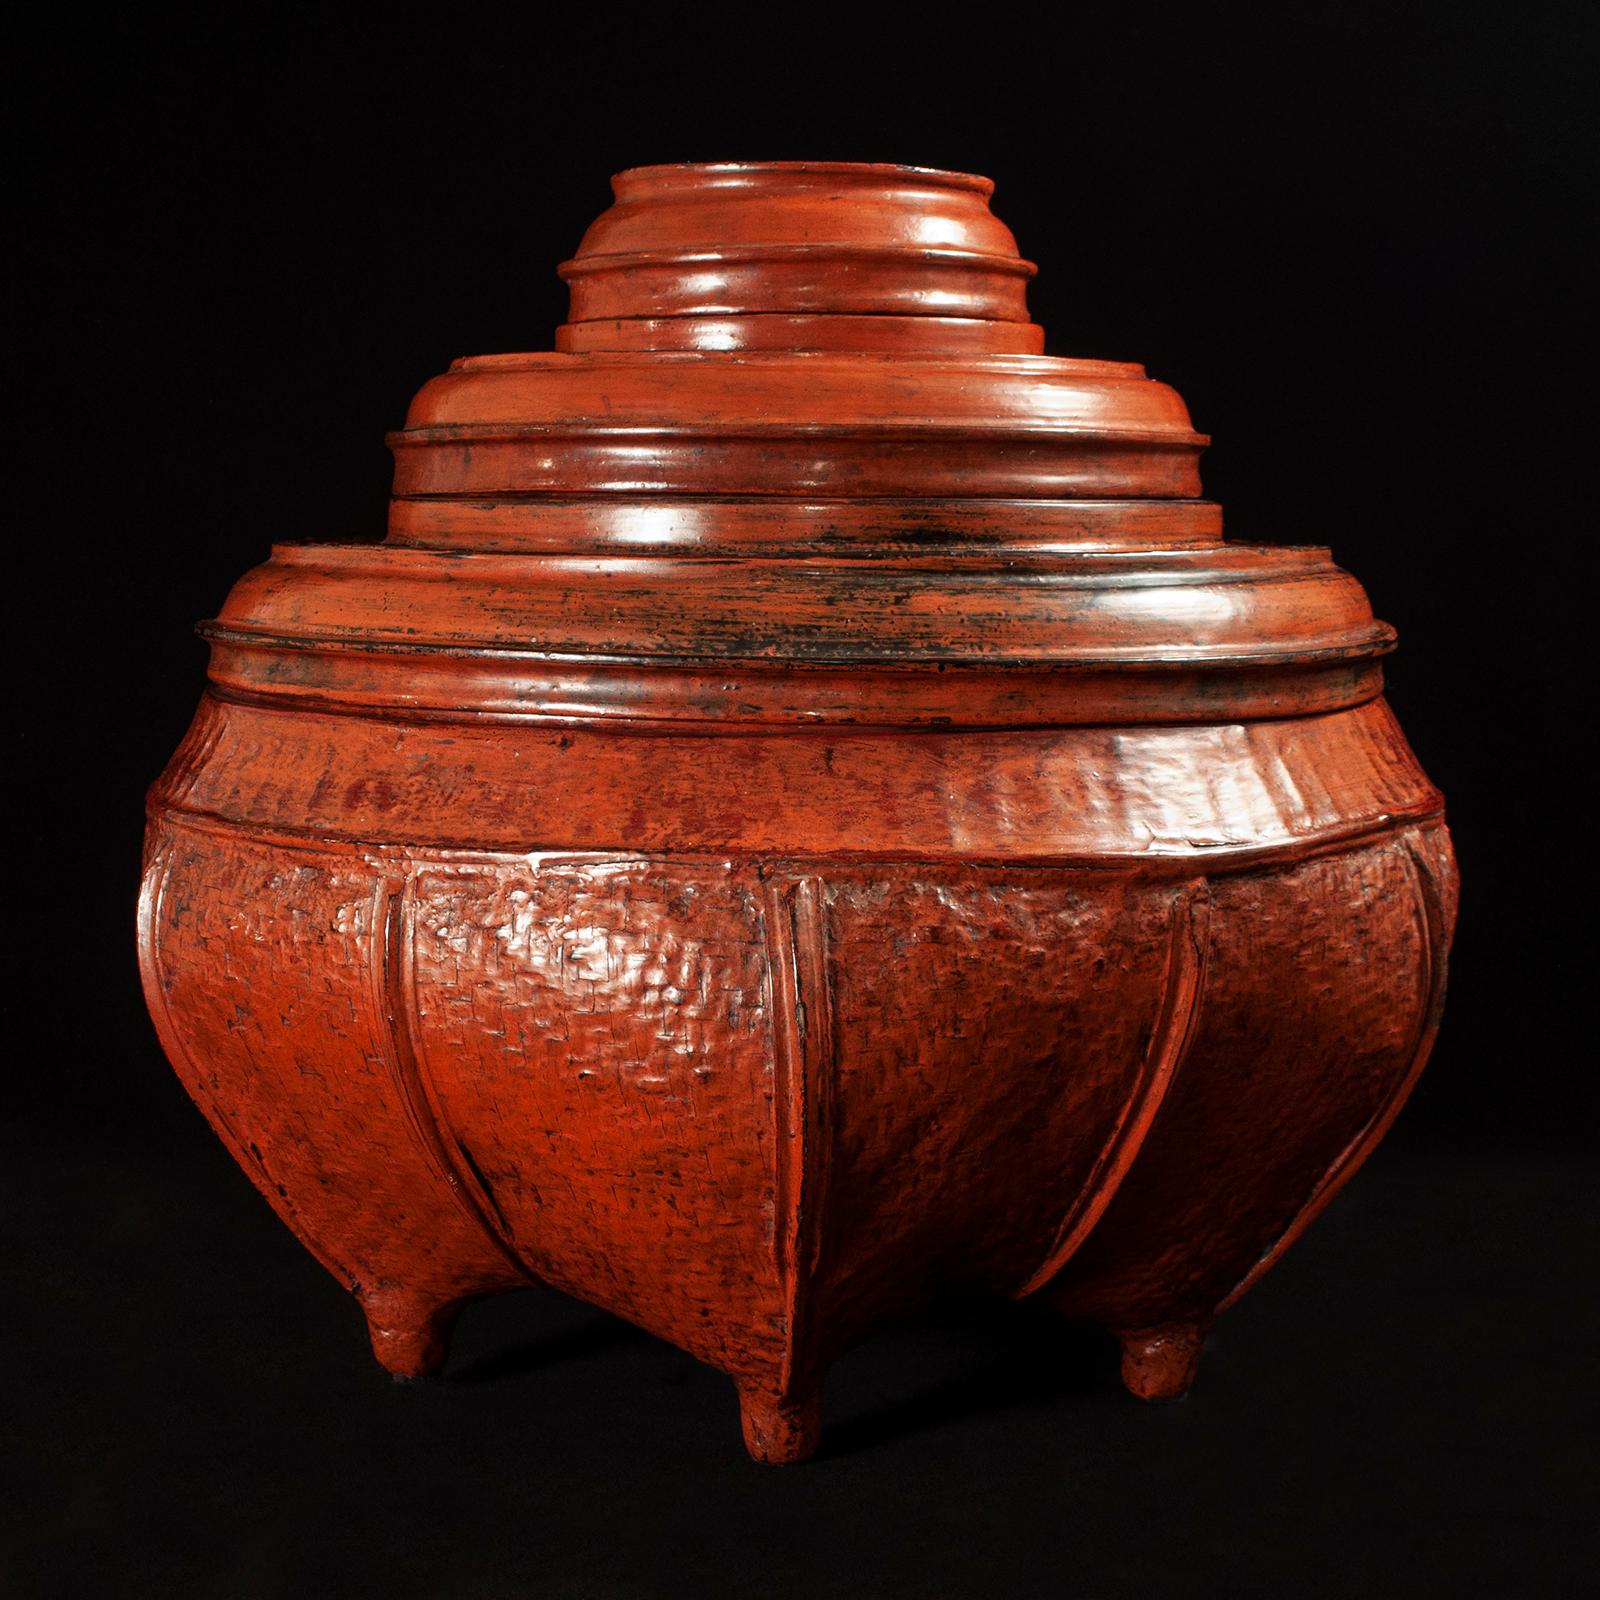 Large early 20th century lacquer and bamboo offering vessel from Burma

A large offering vessel composed of five pieces, which is fashioned from woven bamboo covered with a rich, thick lacquer. It measures 17.25 inches high by 18 inches in diameter